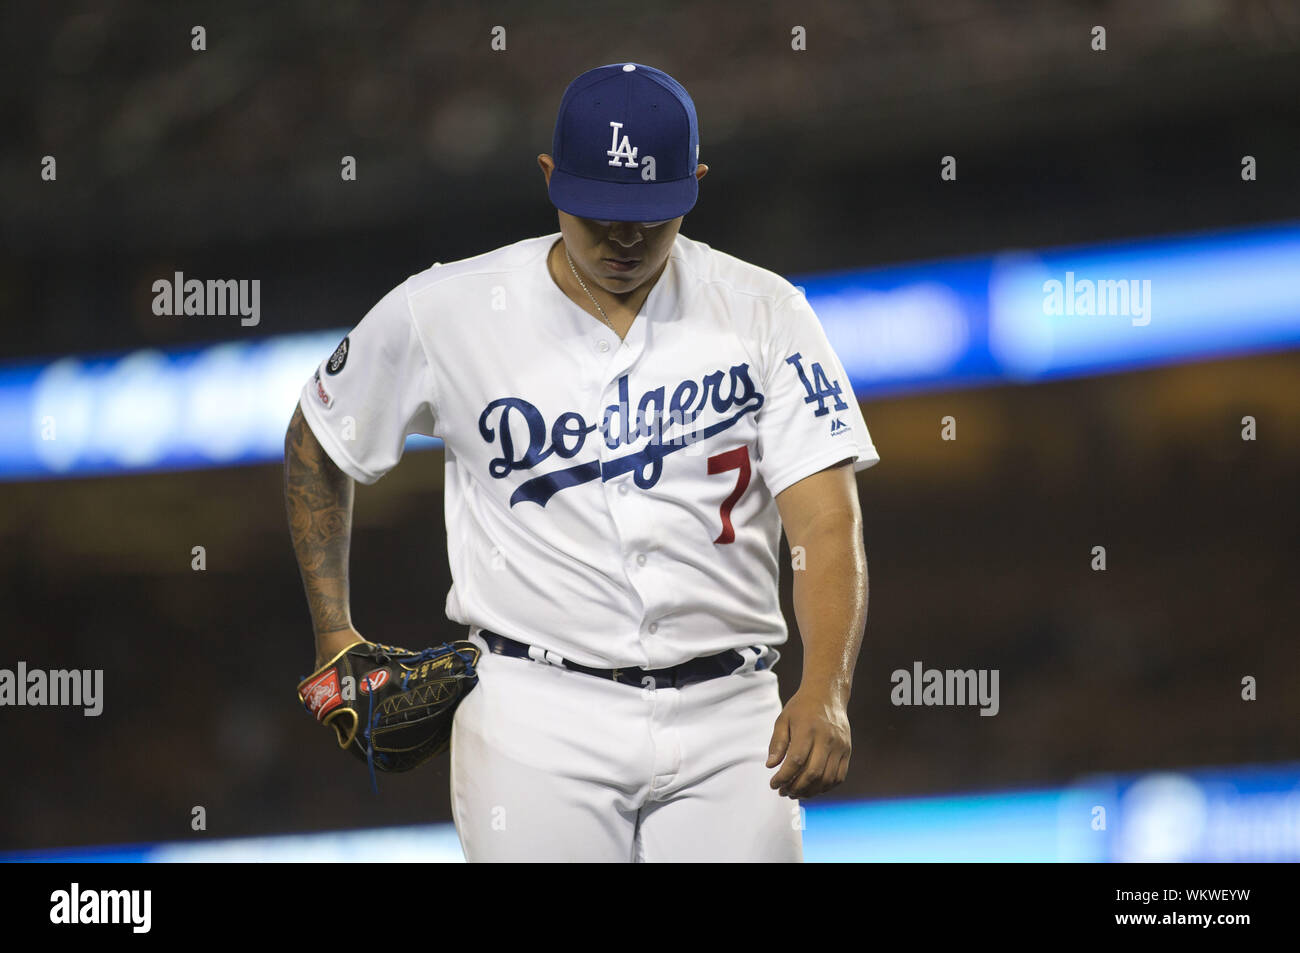 Los Angeles, CALIFORNIA, USA. 3rd Sep, 2019. Pitcher Julio Urias #7 of the  Los Angeles Dodgers during the MLB game against the Colorado Rockies at  Dodger Stadium on September 03, 2019 in